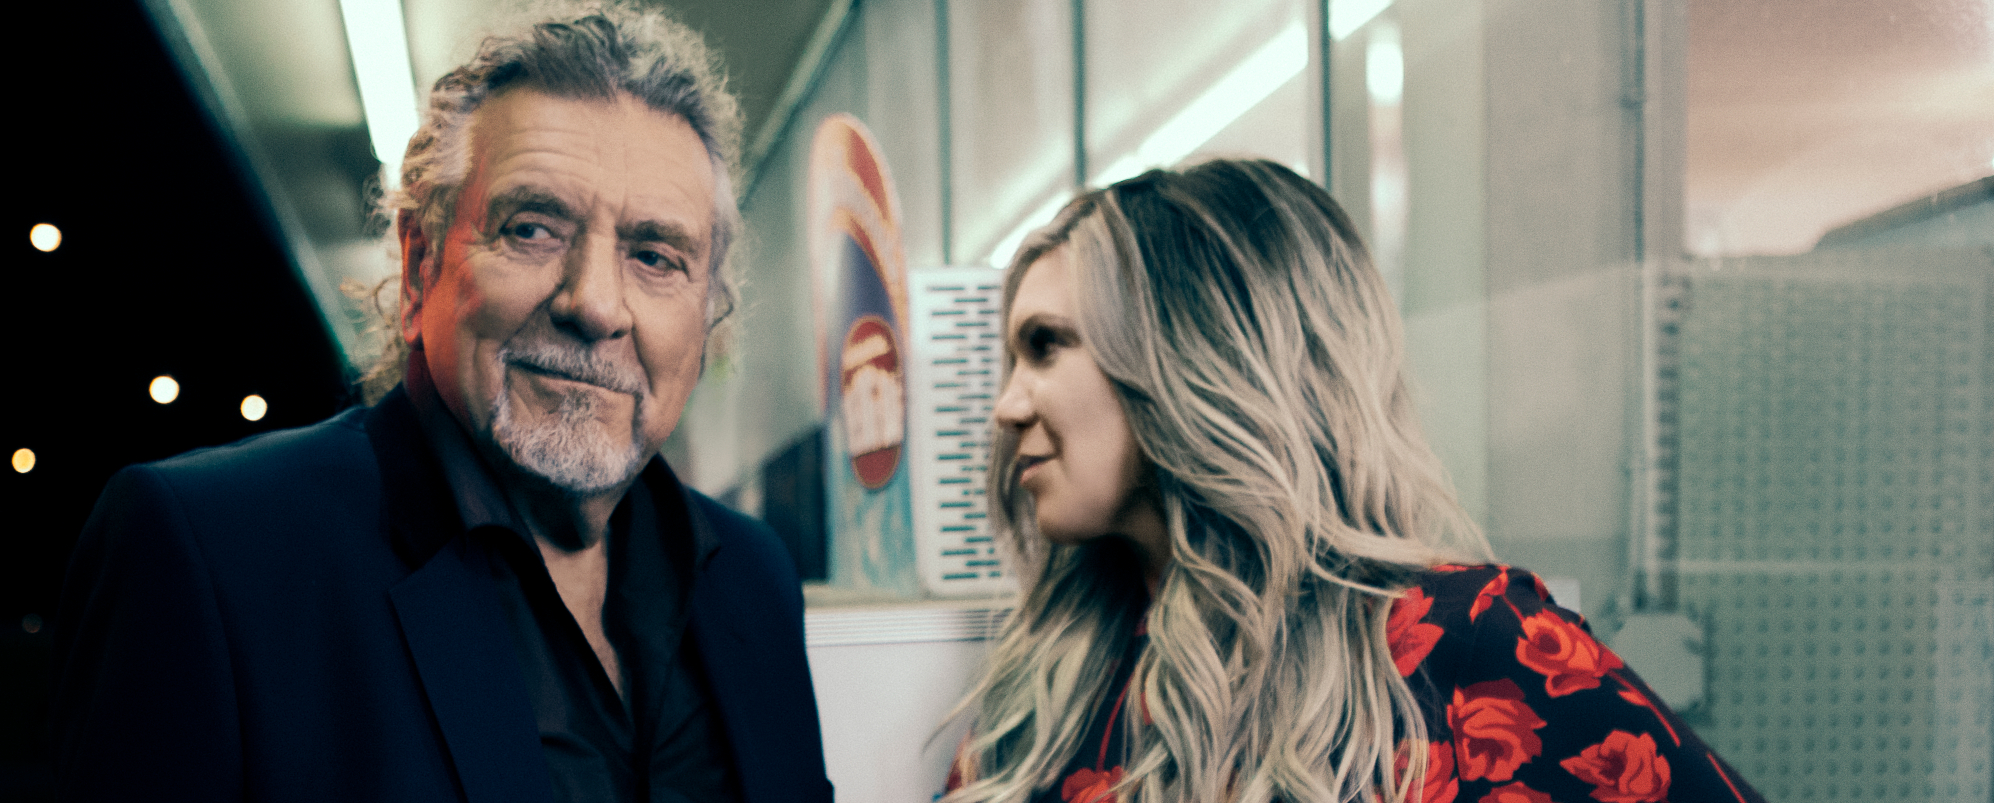 Robert Plant and Alison Krauss Announce Slate of Live Shows and Streams